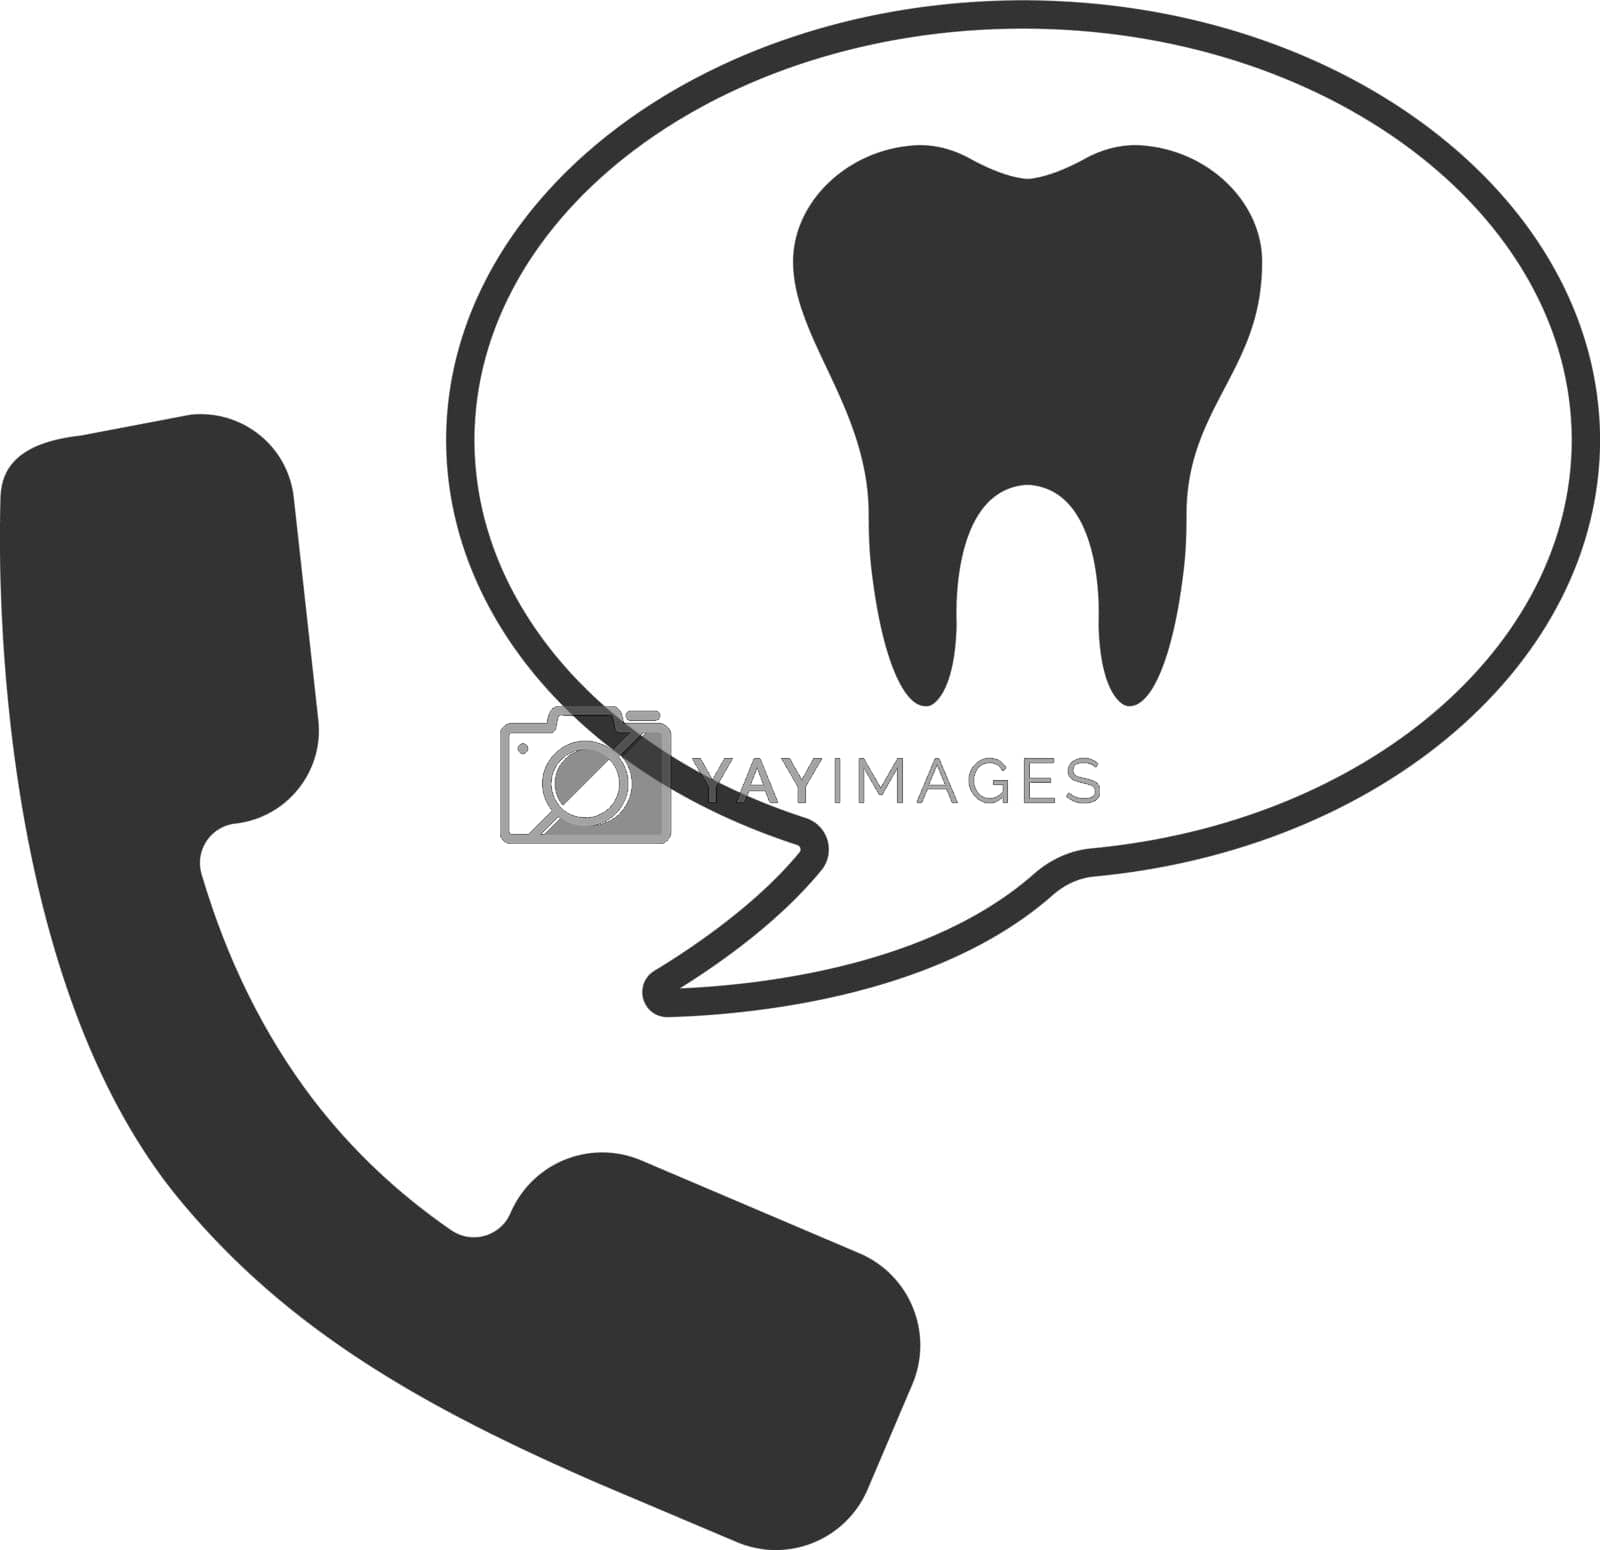 Making appointment with dentist glyph icon. Silhouette symbol. Handset with tooth. Calling to dental clinic. Negative space. Vector isolated illustration